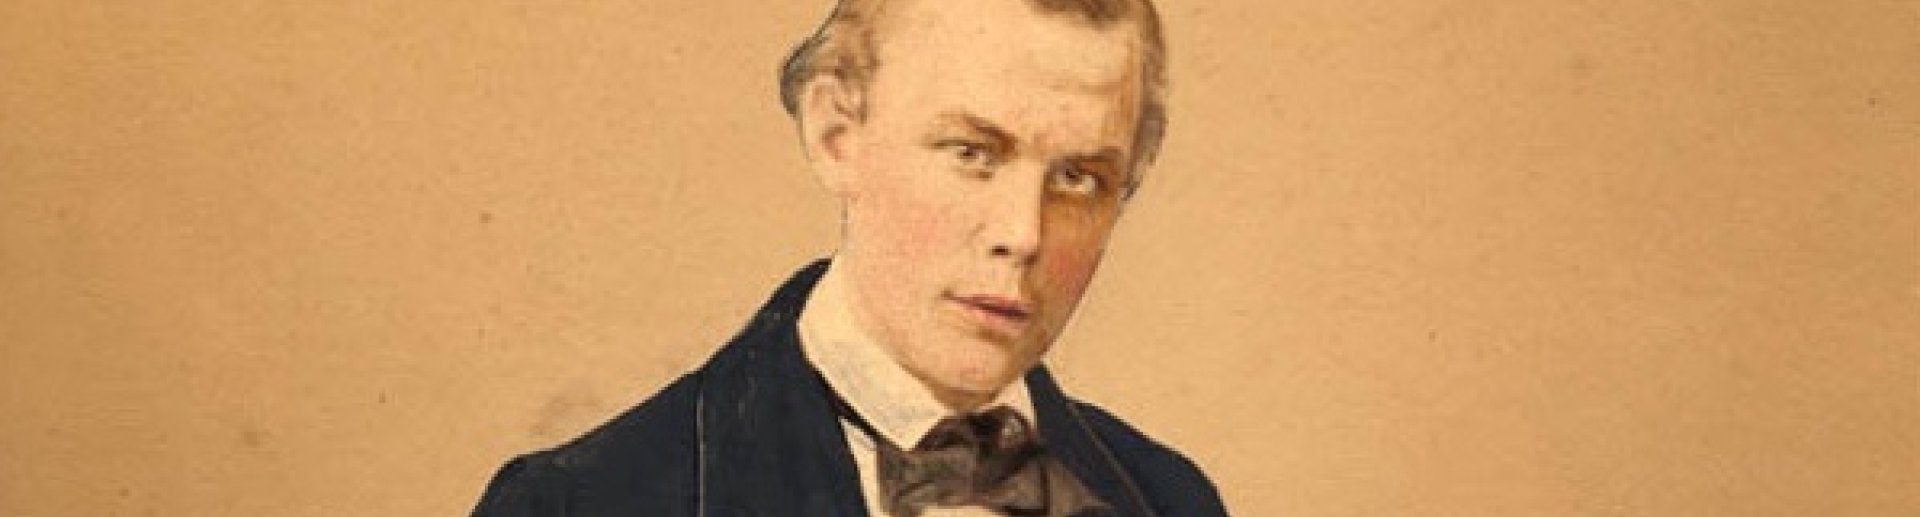 The young Charles Bradlaugh